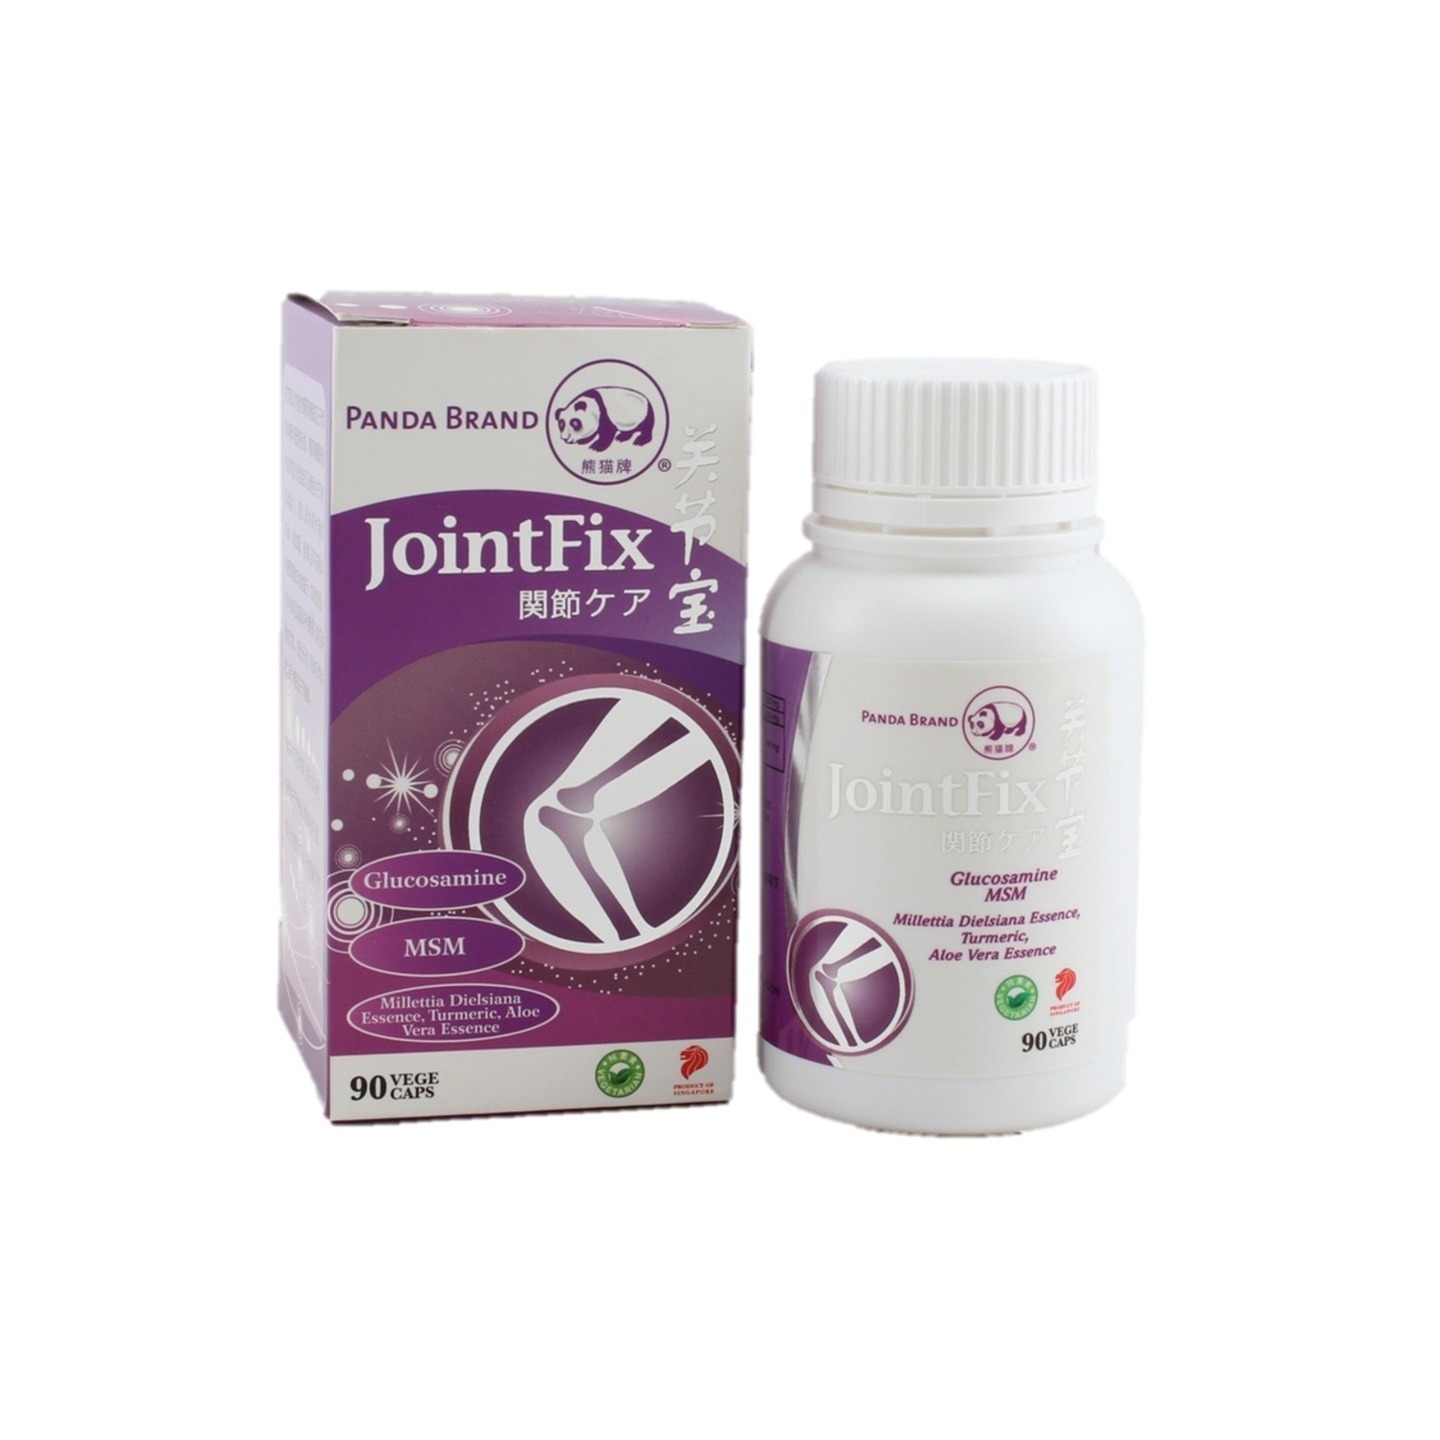 JointFix  100 capsules  关节宝 PROMOTION FOR 2